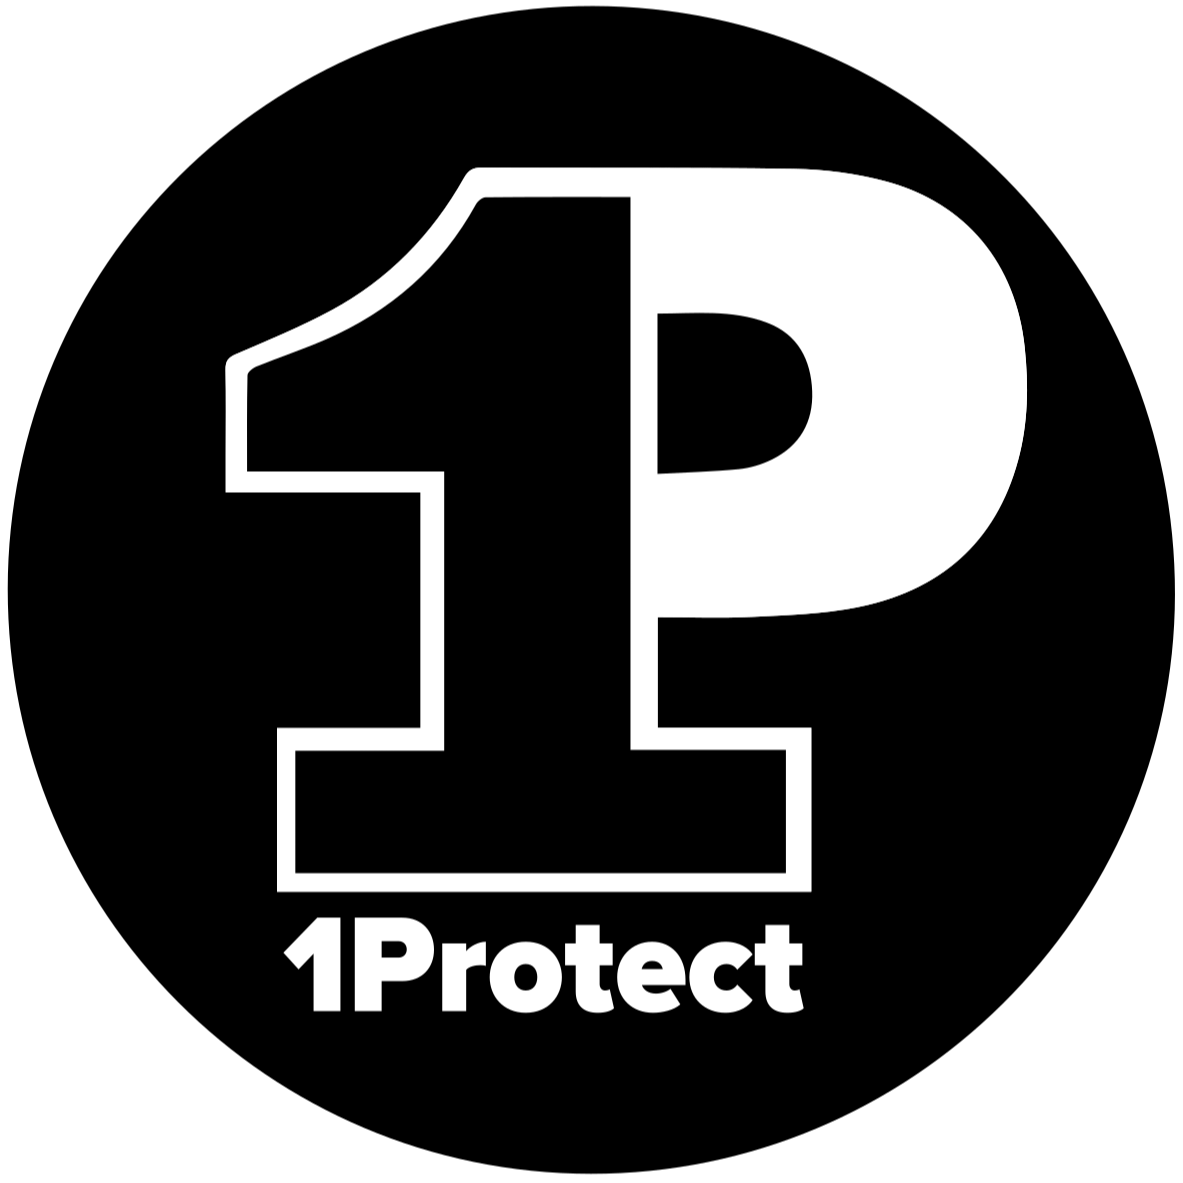 1Protect